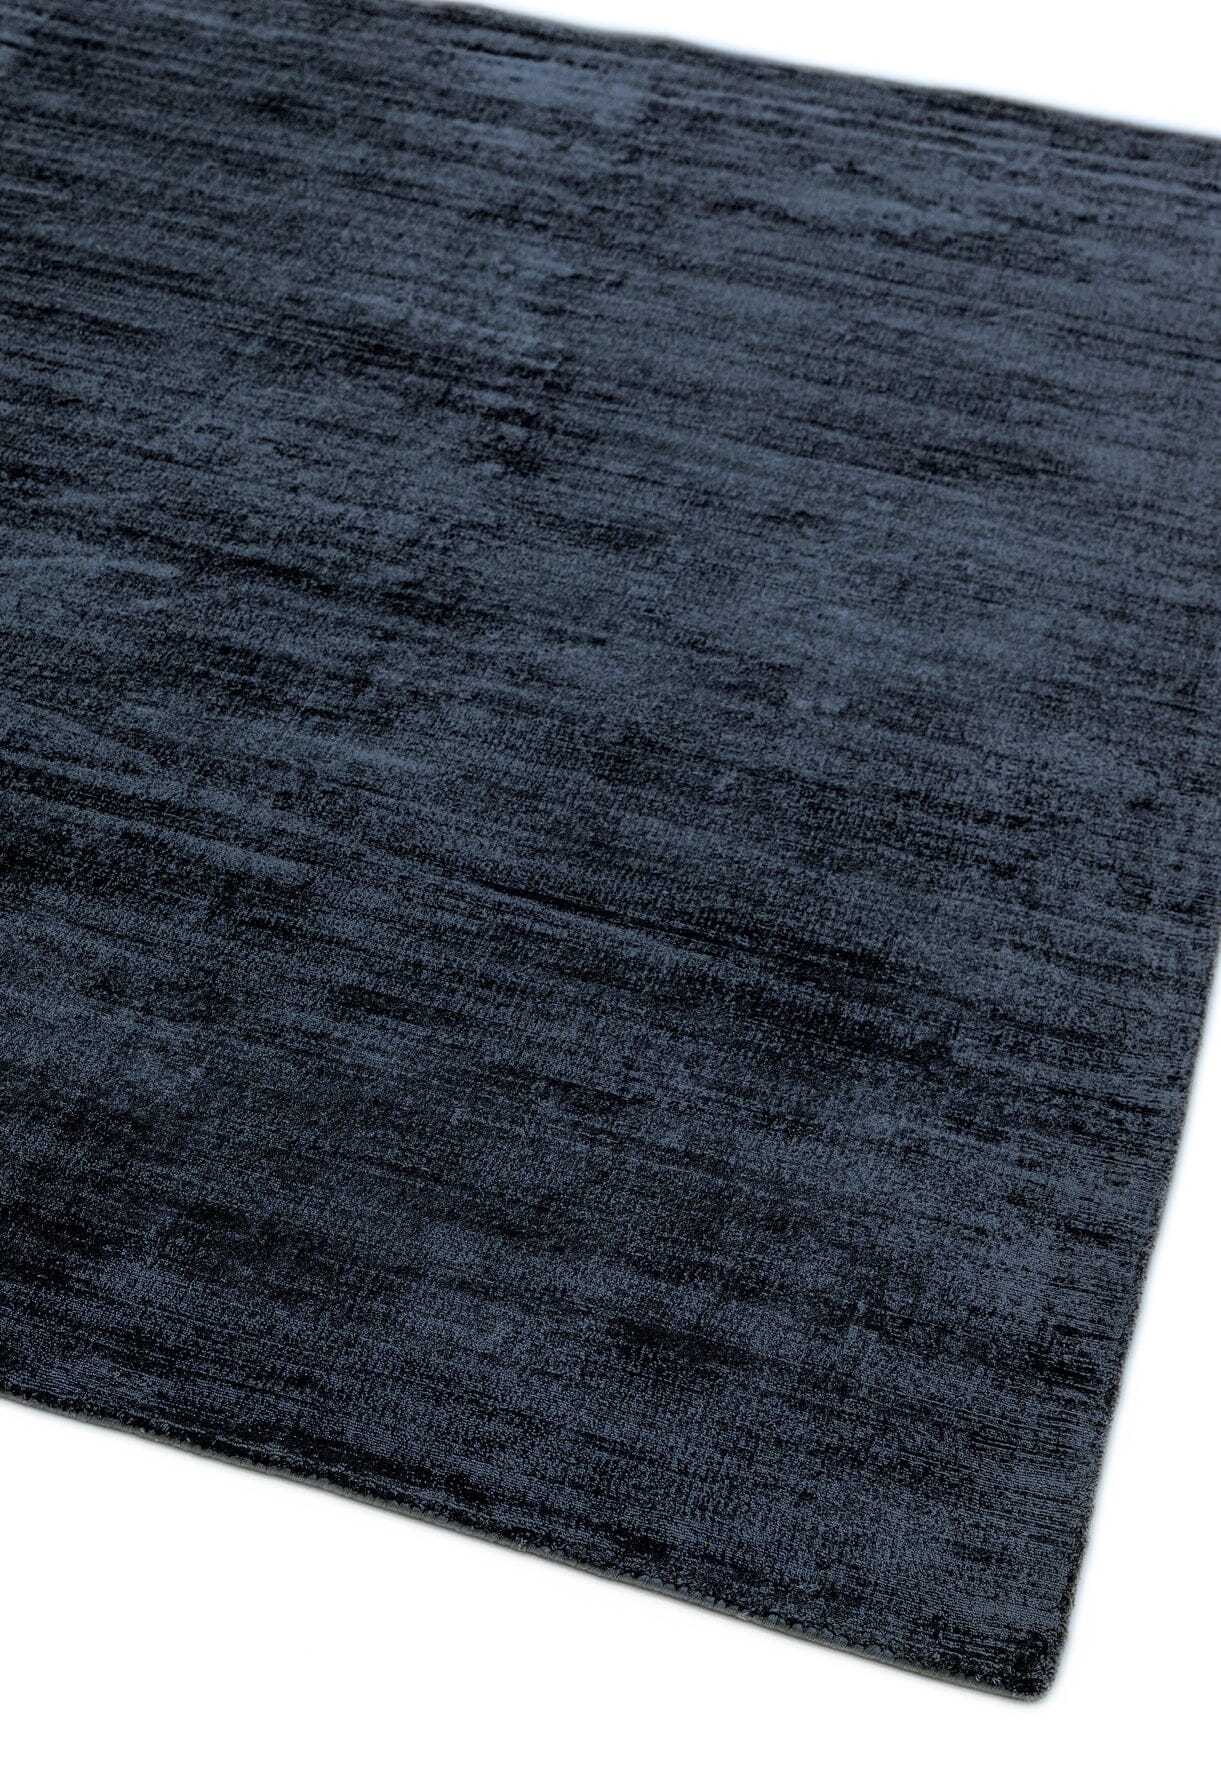 Asiatic Carpets Blade Hand Woven Rug Navy - 160 x 230cm